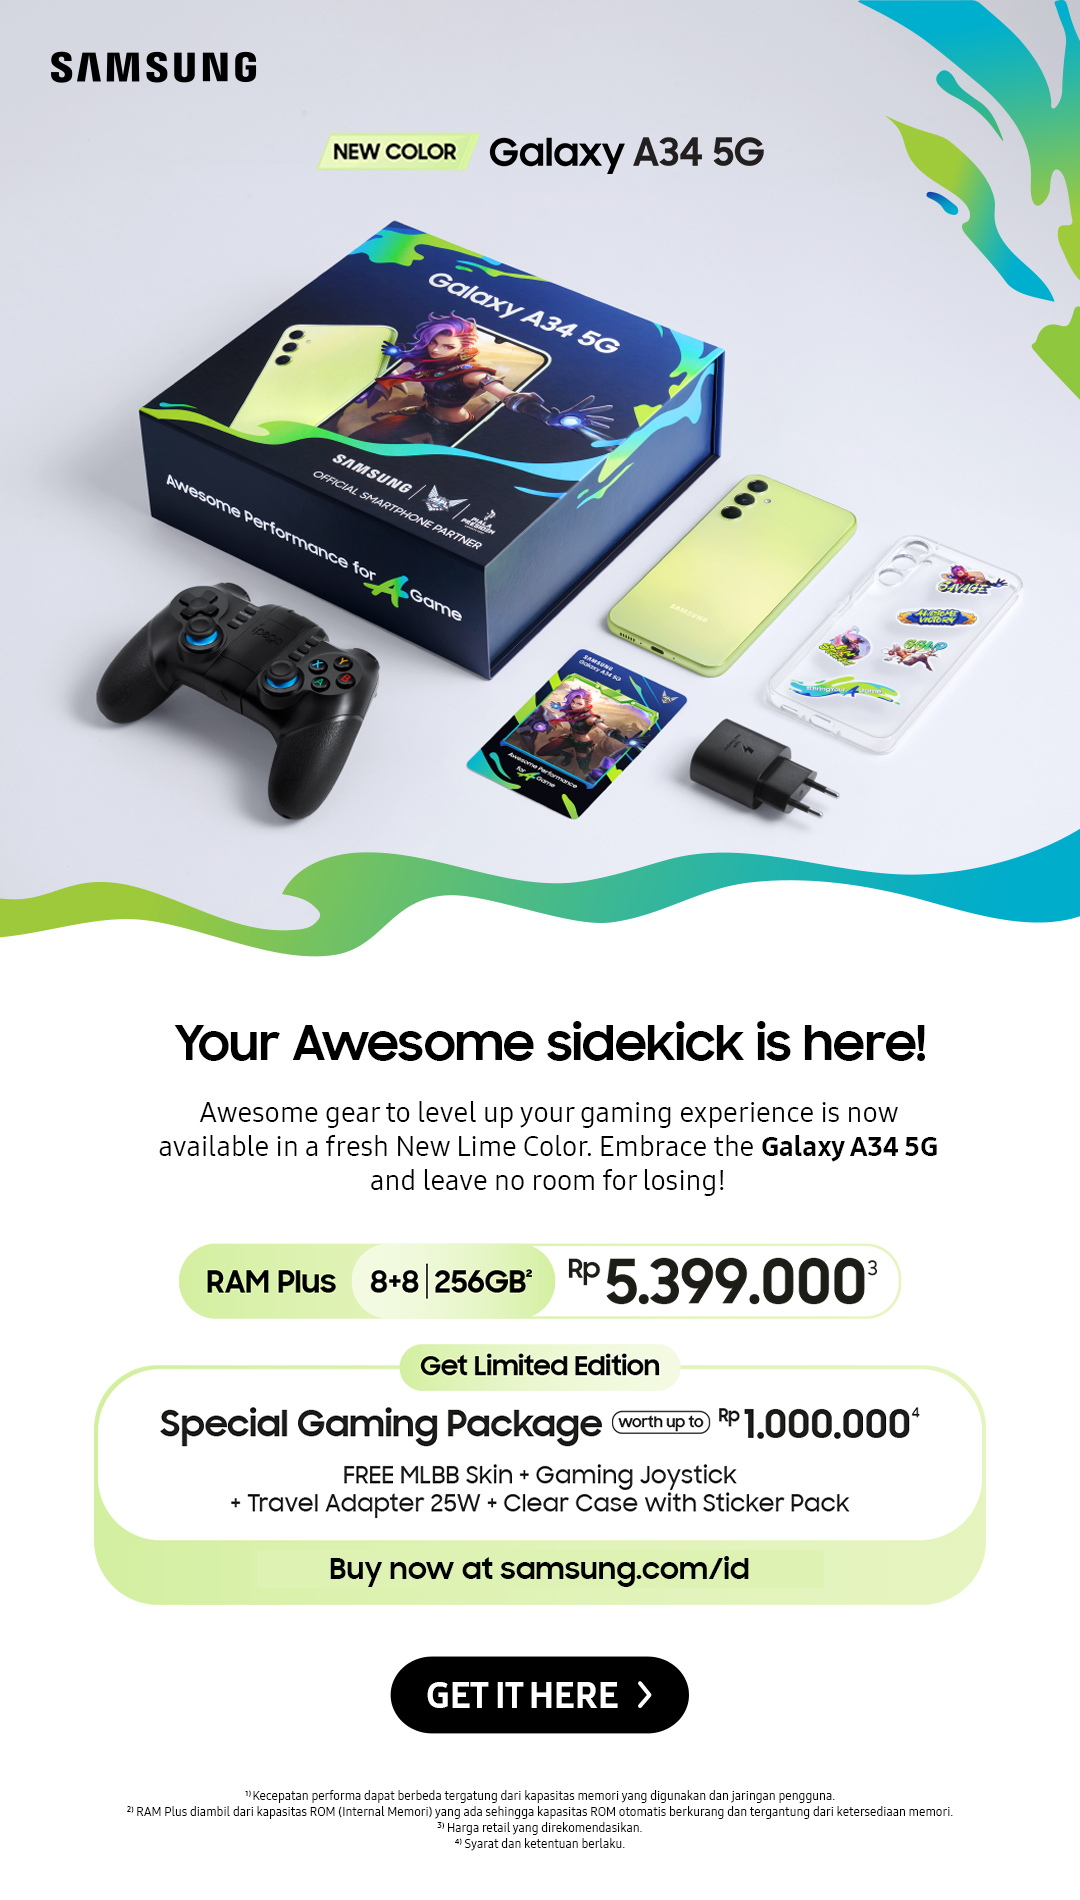 Galaxy A54 5G: AYour Awesome sidekick is here! | Awesome gear to level up your gaming experience is now available in a fresh New Lime Color. Embrace the Galaxy A34 5G and leave no room for losing! Click here to get yours!